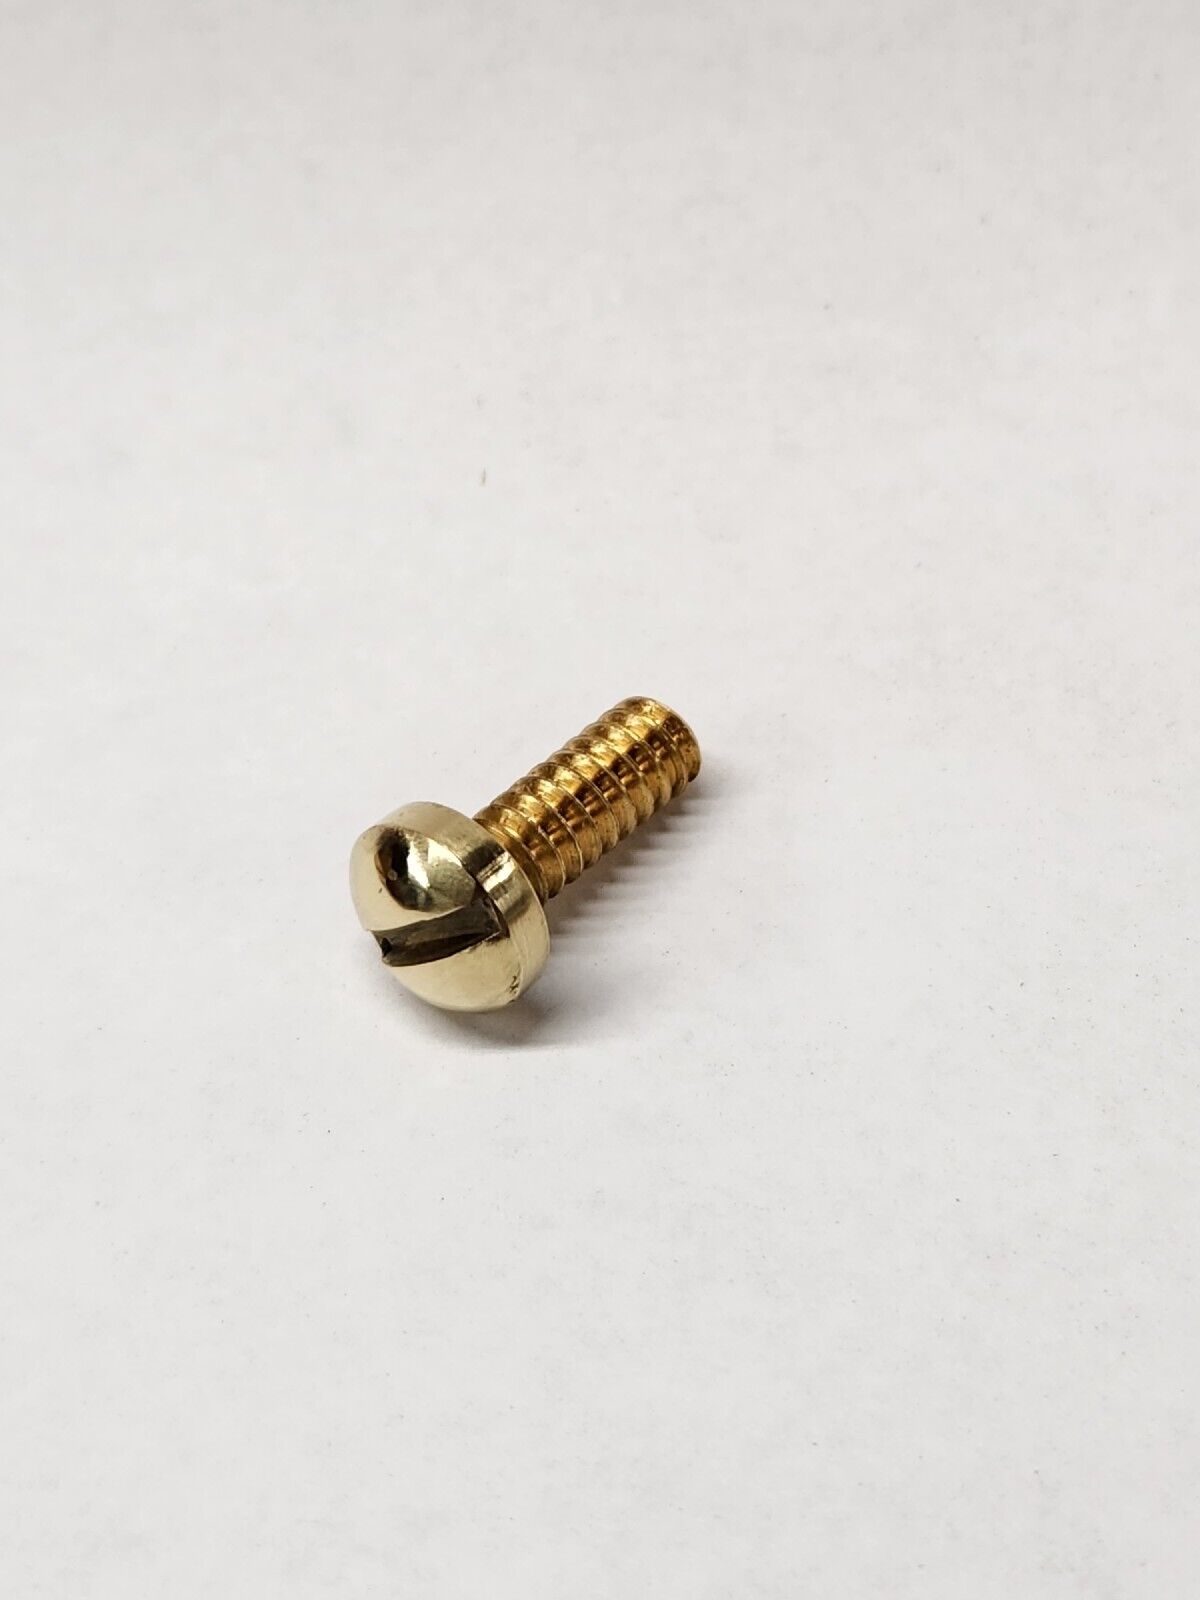 NEW Stanley Plane Parts Brass Screw for the Toe of the Tote/Rear Handle